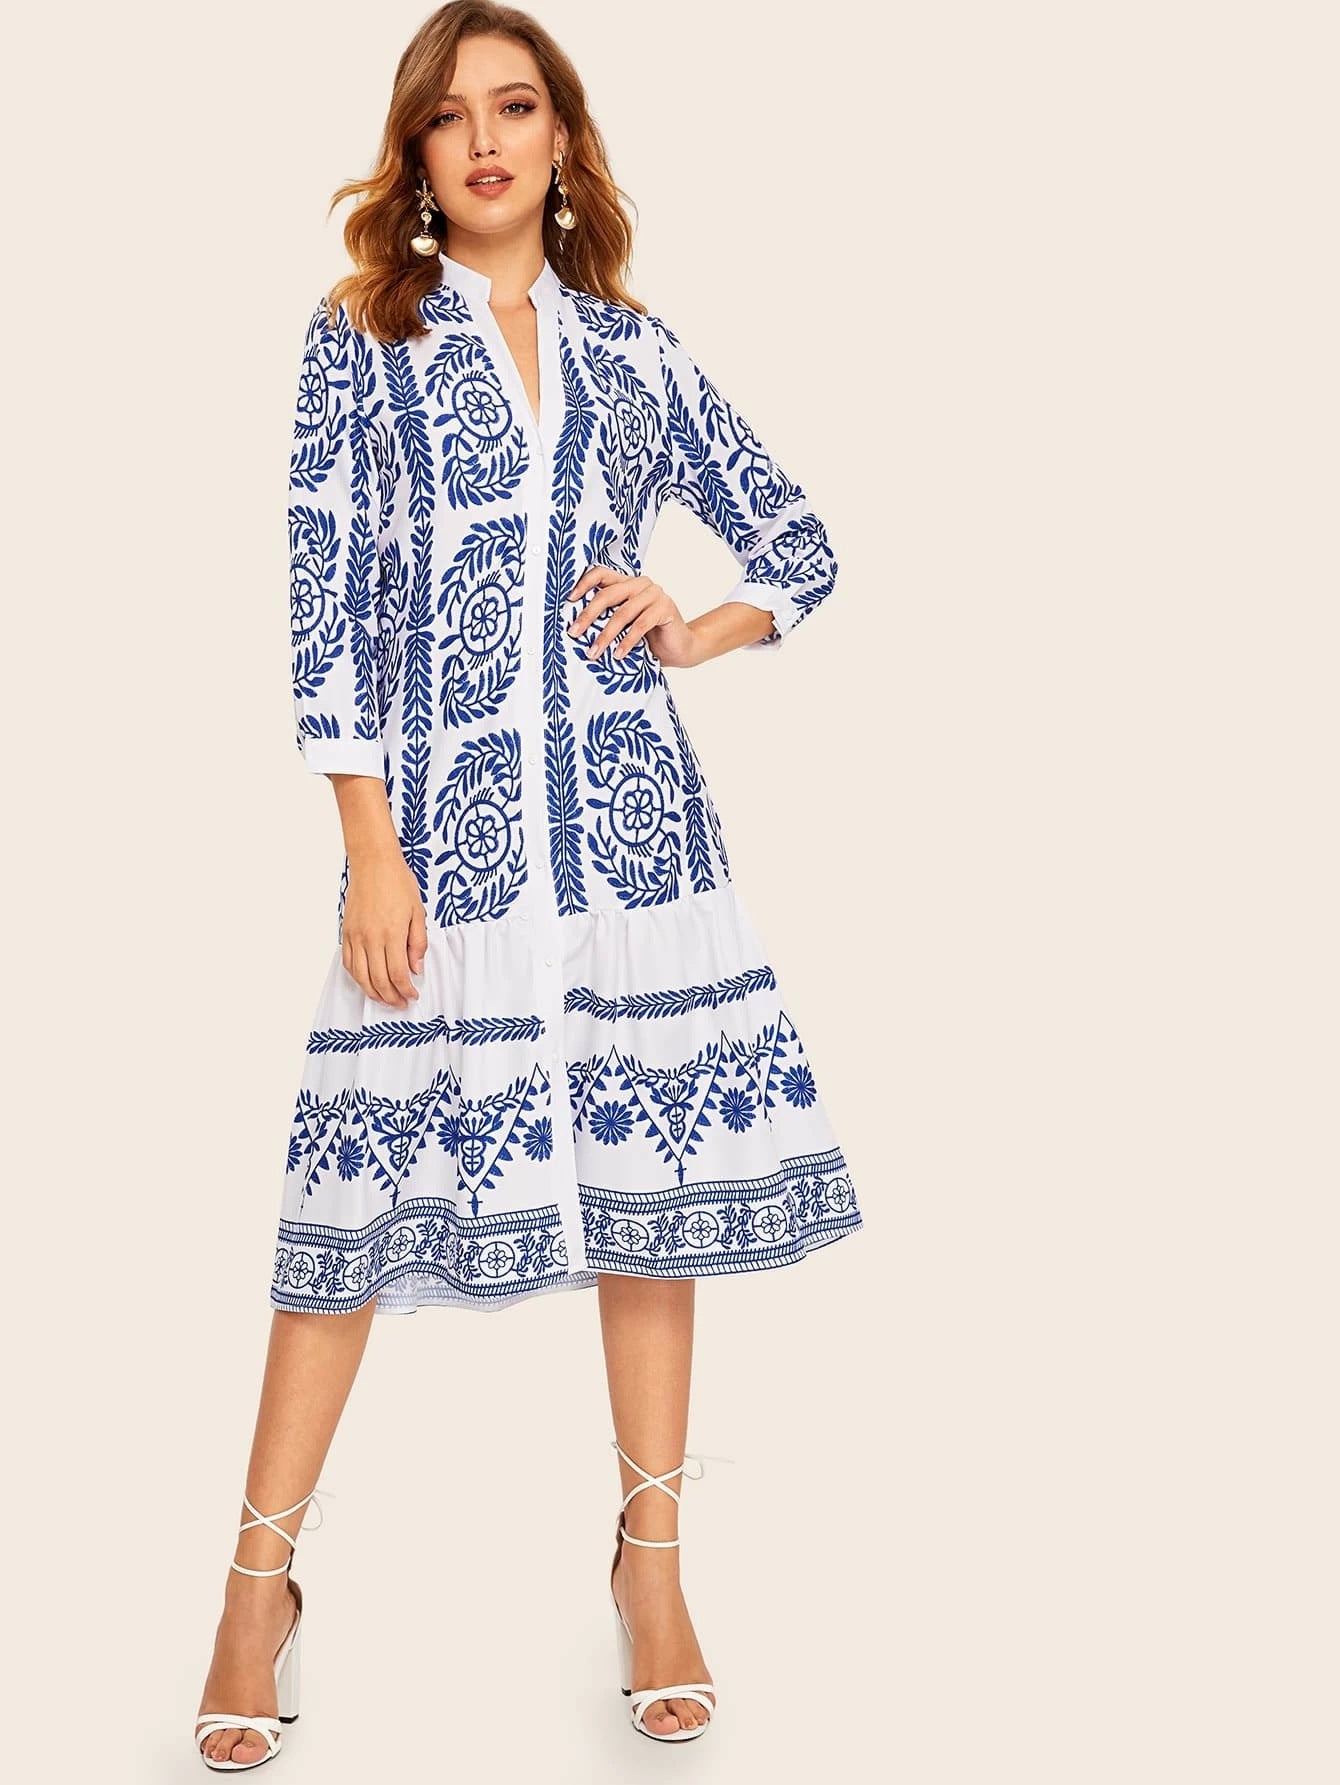 New Women's Blue And White Porcelain Printed Shirt Dress